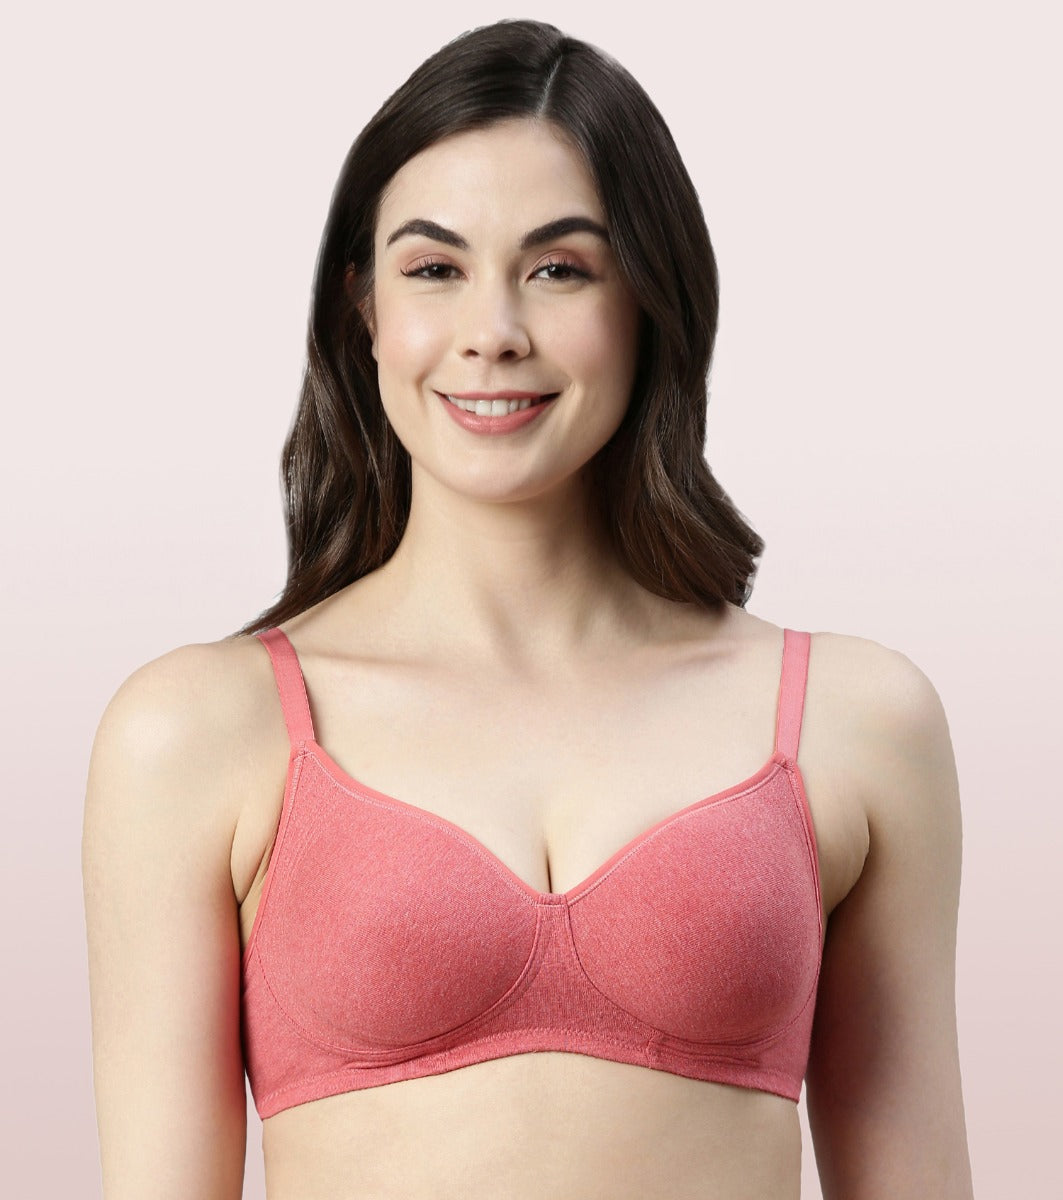 Enamor A052 Shaper Lace Bra - Non-Padded Wirefree High Coverage - Navy